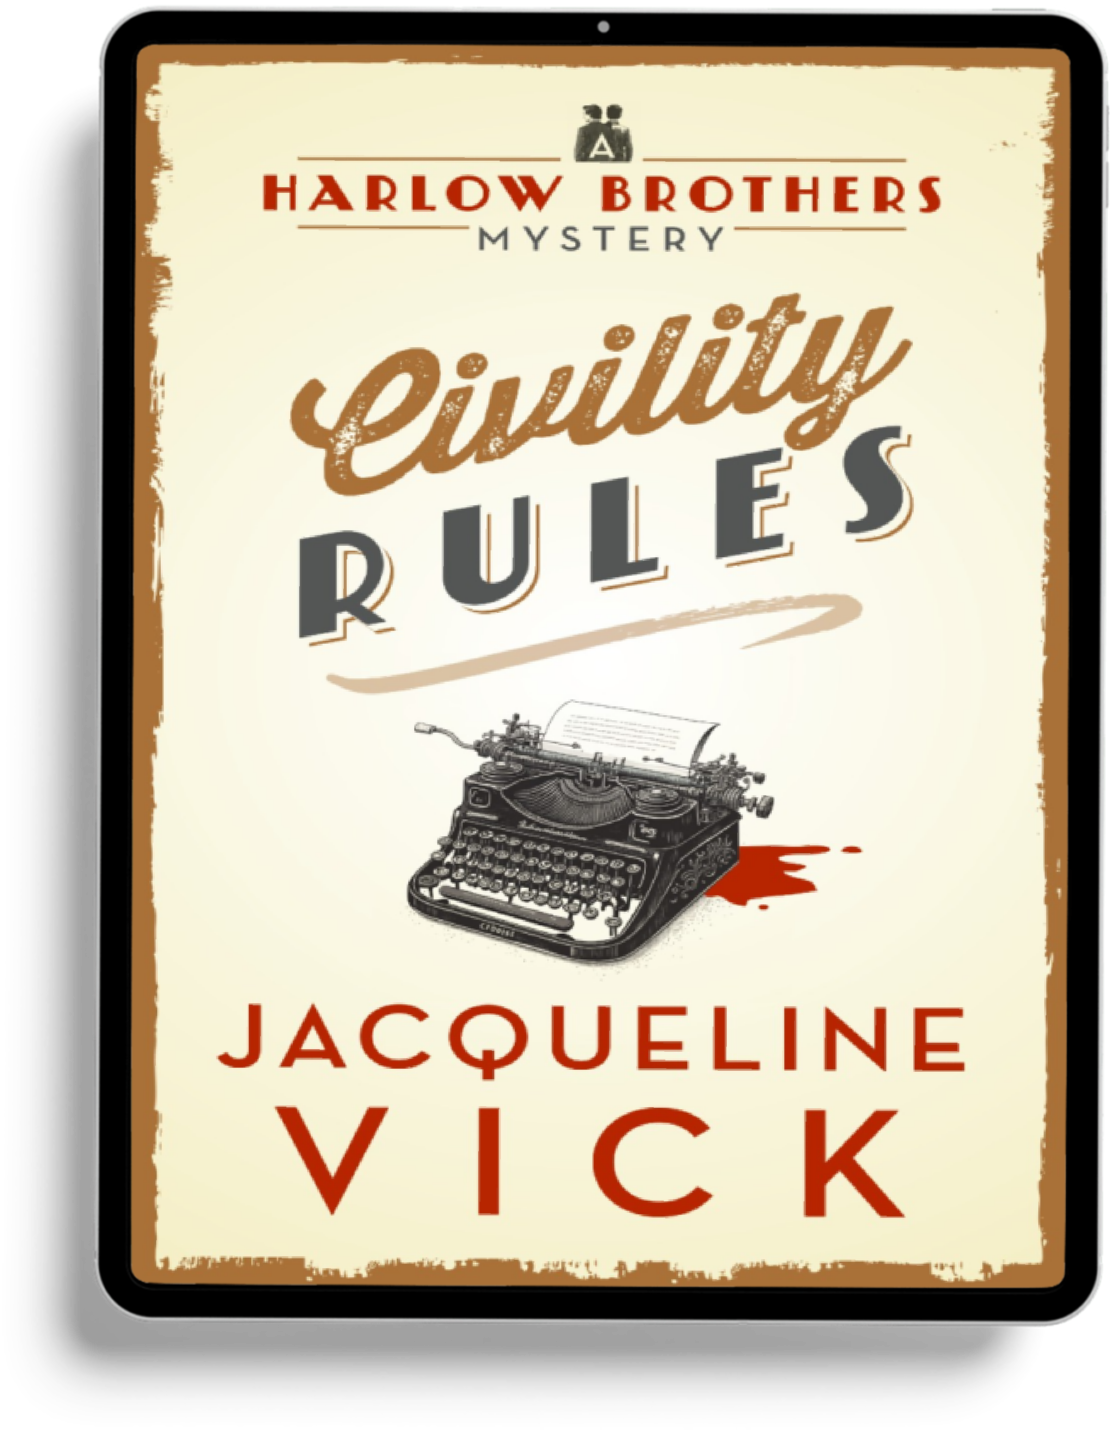 Civility Rules EBOOK (Book 1 in the Harlow Brothers Mysteries)